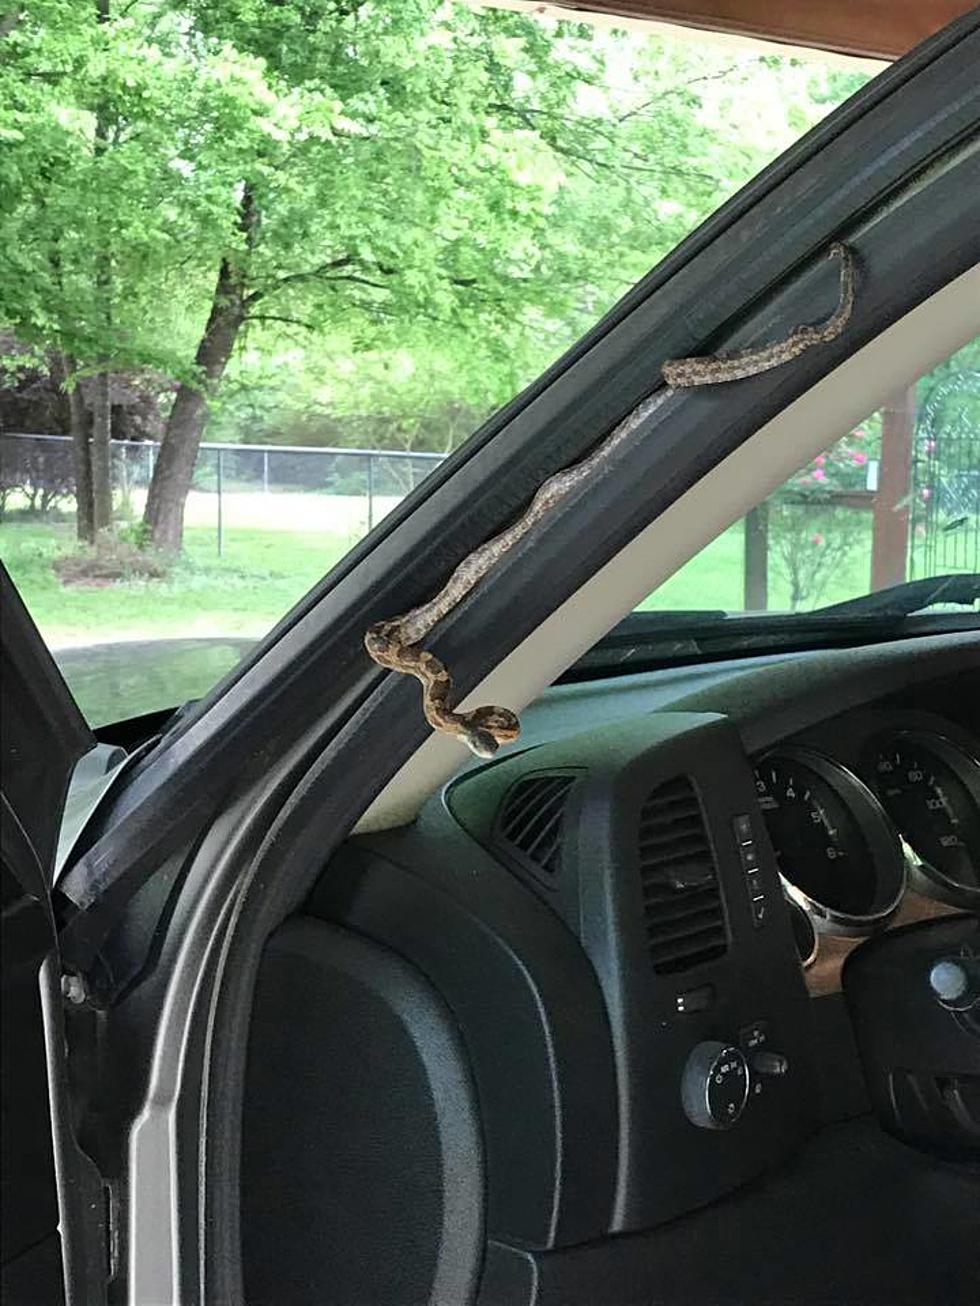 Texas Woman Opens Truck Door, Looks Up and Makes a New Friend&#8230; Well, Not Really